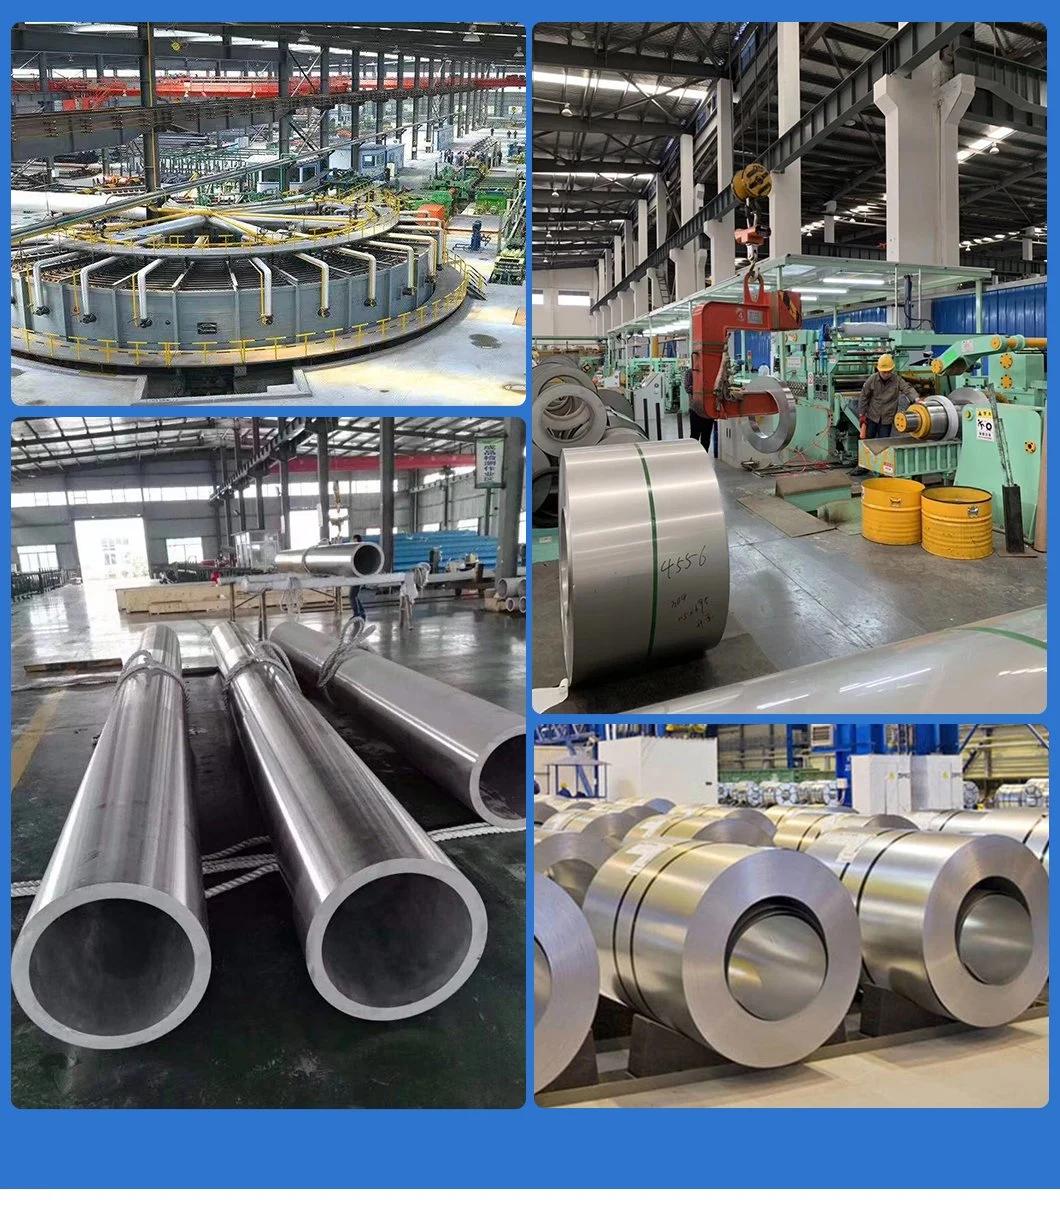 1.4466 1.4361 1.4818 Stainless Steel Coil Professional Supply